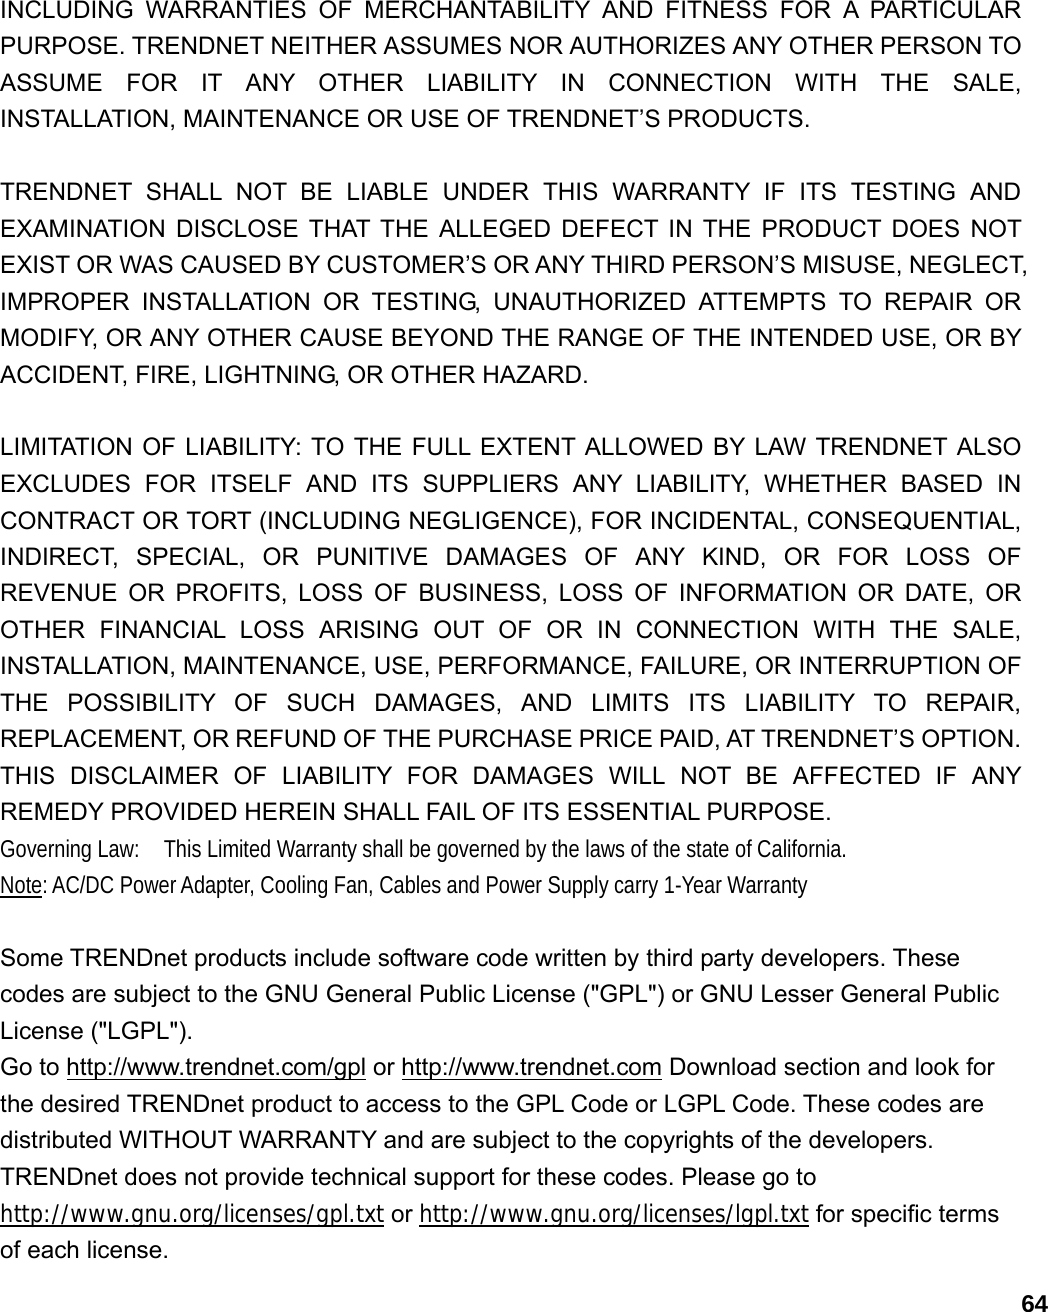                             64INCLUDING WARRANTIES OF MERCHANTABILITY AND FITNESS FOR A PARTICULAR PURPOSE. TRENDNET NEITHER ASSUMES NOR AUTHORIZES ANY OTHER PERSON TO ASSUME FOR IT ANY OTHER LIABILITY IN CONNECTION WITH THE SALE, INSTALLATION, MAINTENANCE OR USE OF TRENDNET’S PRODUCTS.  TRENDNET SHALL NOT BE LIABLE UNDER THIS WARRANTY IF ITS TESTING AND EXAMINATION DISCLOSE THAT THE ALLEGED DEFECT IN THE PRODUCT DOES NOT EXIST OR WAS CAUSED BY CUSTOMER’S OR ANY THIRD PERSON’S MISUSE, NEGLECT, IMPROPER INSTALLATION OR TESTING, UNAUTHORIZED ATTEMPTS TO REPAIR OR MODIFY, OR ANY OTHER CAUSE BEYOND THE RANGE OF THE INTENDED USE, OR BY ACCIDENT, FIRE, LIGHTNING, OR OTHER HAZARD.  LIMITATION OF LIABILITY: TO THE FULL EXTENT ALLOWED BY LAW TRENDNET ALSO EXCLUDES FOR ITSELF AND ITS SUPPLIERS ANY LIABILITY, WHETHER BASED IN CONTRACT OR TORT (INCLUDING NEGLIGENCE), FOR INCIDENTAL, CONSEQUENTIAL, INDIRECT, SPECIAL, OR PUNITIVE DAMAGES OF ANY KIND, OR FOR LOSS OF REVENUE OR PROFITS, LOSS OF BUSINESS, LOSS OF INFORMATION OR DATE, OR OTHER FINANCIAL LOSS ARISING OUT OF OR IN CONNECTION WITH THE SALE, INSTALLATION, MAINTENANCE, USE, PERFORMANCE, FAILURE, OR INTERRUPTION OF THE POSSIBILITY OF SUCH DAMAGES, AND LIMITS ITS LIABILITY TO REPAIR, REPLACEMENT, OR REFUND OF THE PURCHASE PRICE PAID, AT TRENDNET’S OPTION. THIS DISCLAIMER OF LIABILITY FOR DAMAGES WILL NOT BE AFFECTED IF ANY REMEDY PROVIDED HEREIN SHALL FAIL OF ITS ESSENTIAL PURPOSE. Governing Law:    This Limited Warranty shall be governed by the laws of the state of California. Note: AC/DC Power Adapter, Cooling Fan, Cables and Power Supply carry 1-Year Warranty  Some TRENDnet products include software code written by third party developers. These codes are subject to the GNU General Public License (&quot;GPL&quot;) or GNU Lesser General Public License (&quot;LGPL&quot;).   Go to http://www.trendnet.com/gpl or http://www.trendnet.com Download section and look for the desired TRENDnet product to access to the GPL Code or LGPL Code. These codes are distributed WITHOUT WARRANTY and are subject to the copyrights of the developers. TRENDnet does not provide technical support for these codes. Please go to http://www.gnu.org/licenses/gpl.txt or http://www.gnu.org/licenses/lgpl.txt for specific terms of each license.